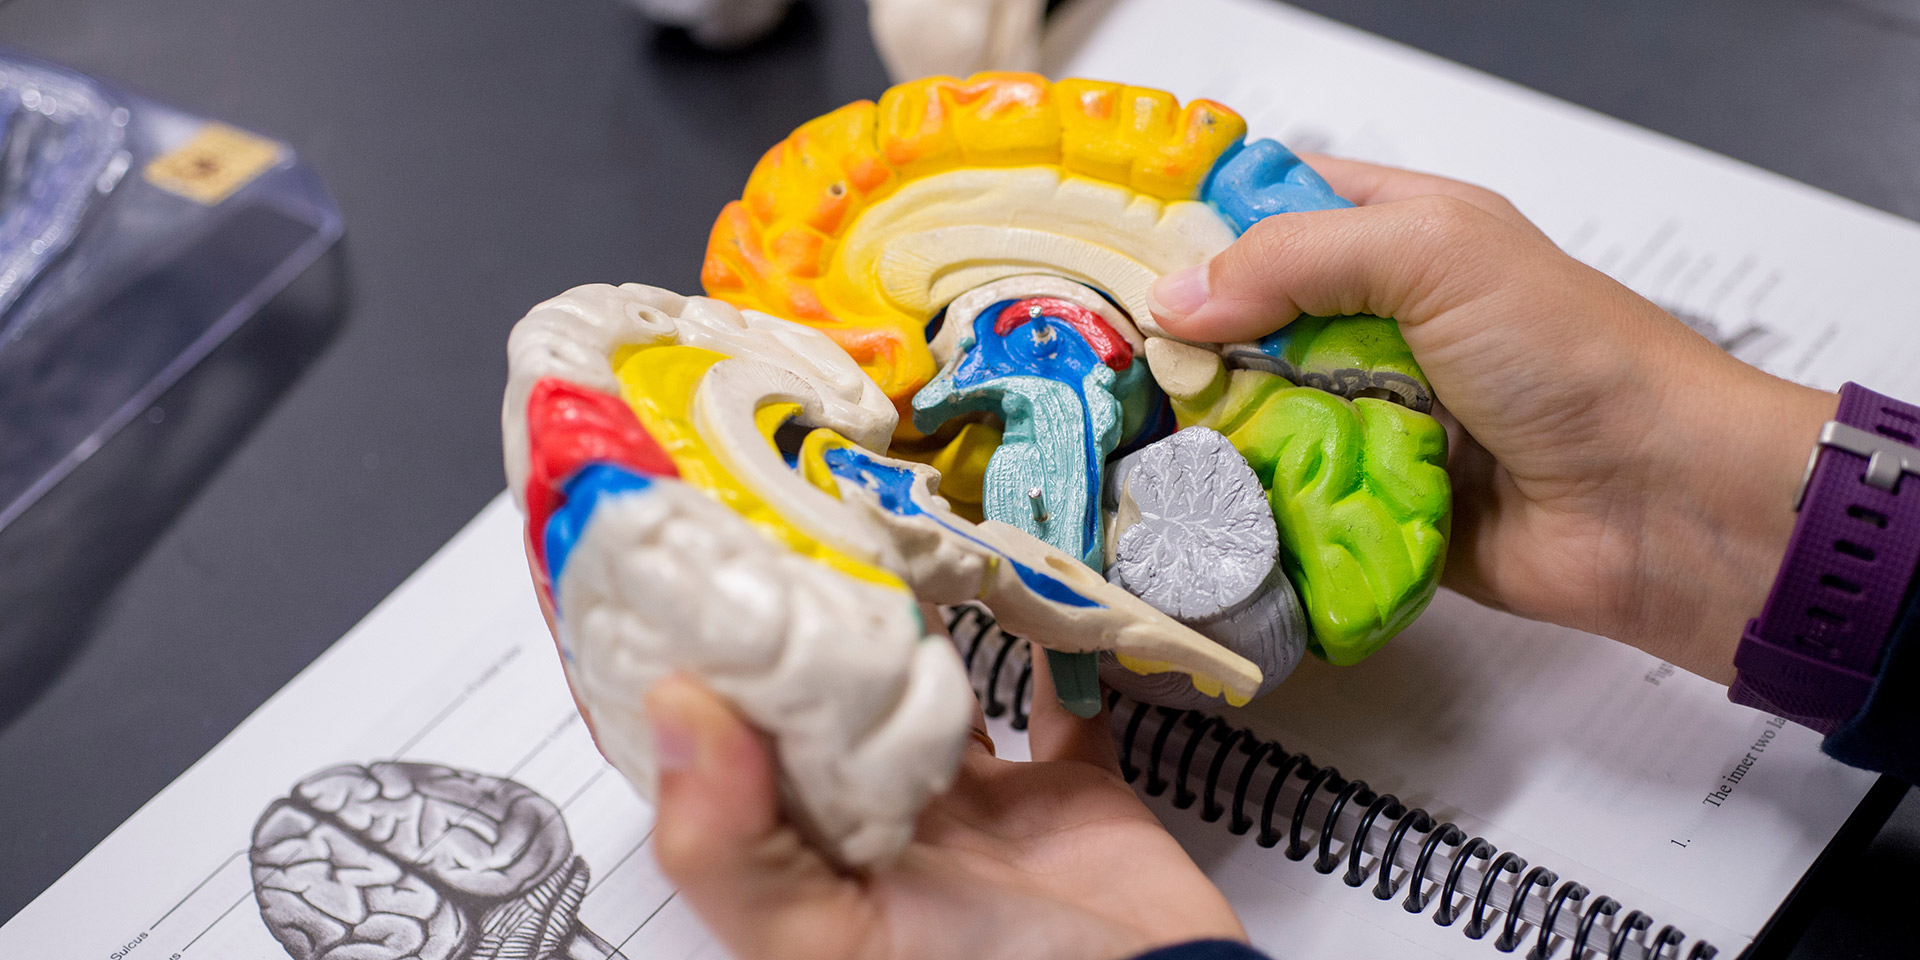 A close-up of model of a brain being opened